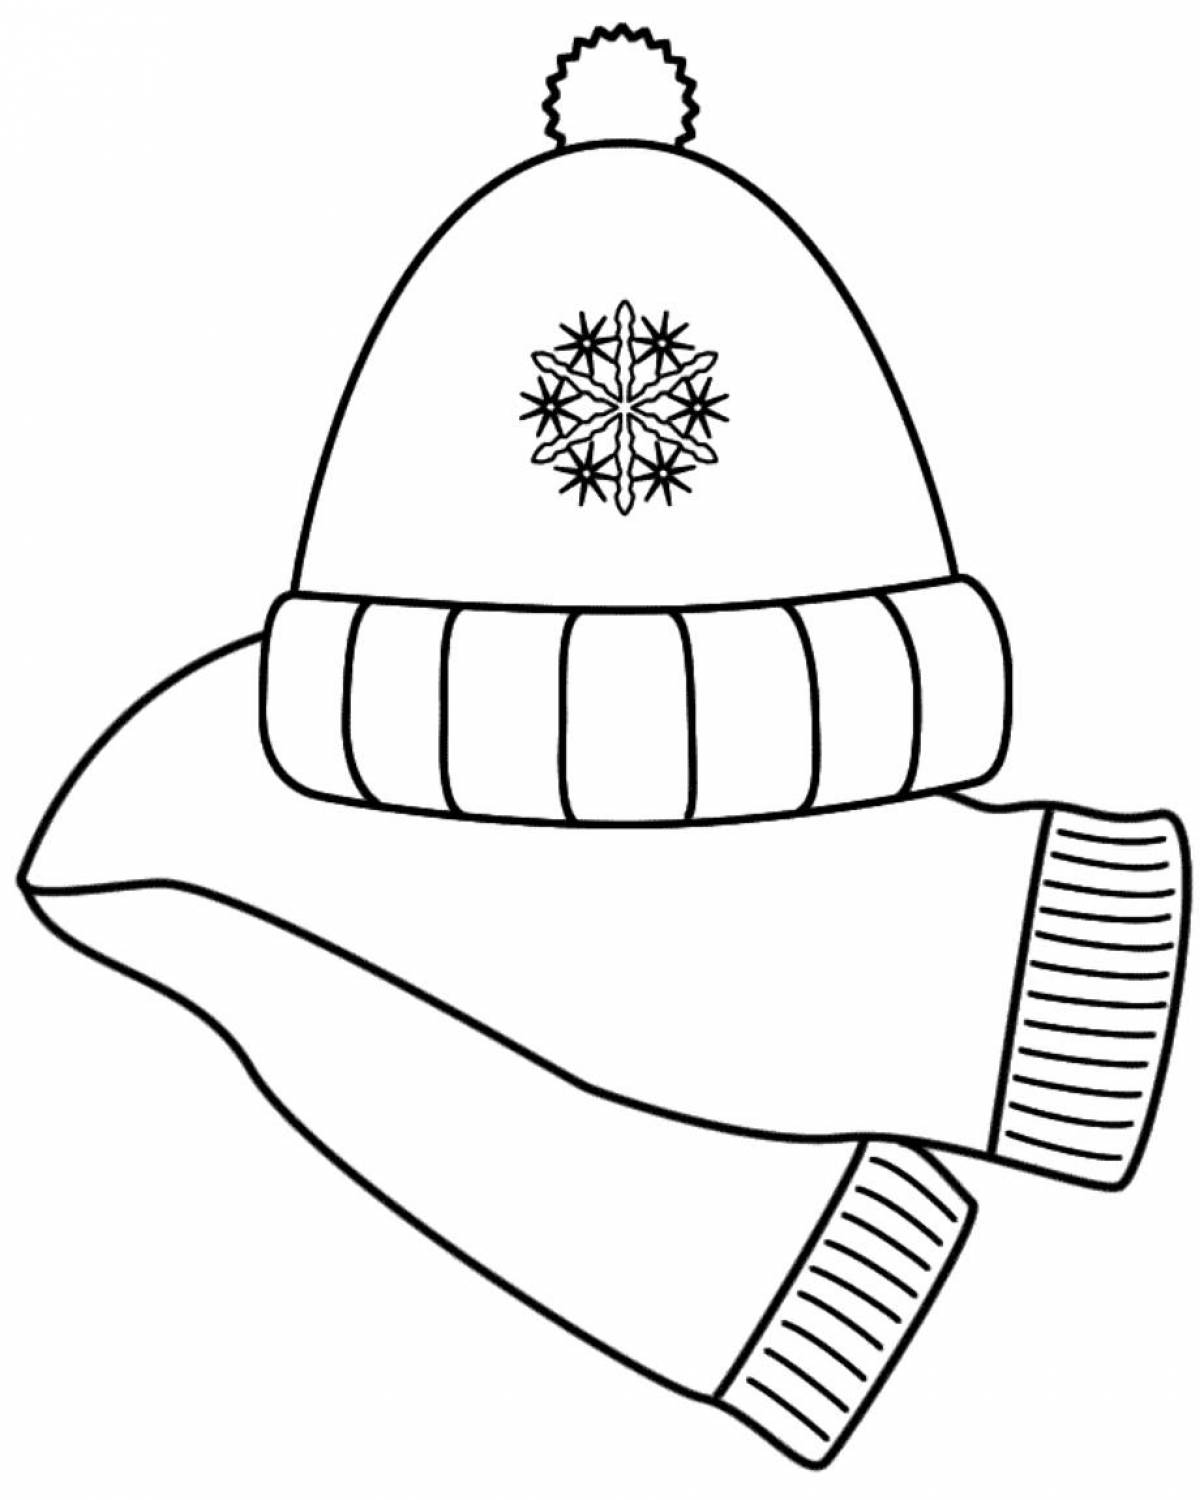 Coloring page with spectacular cap